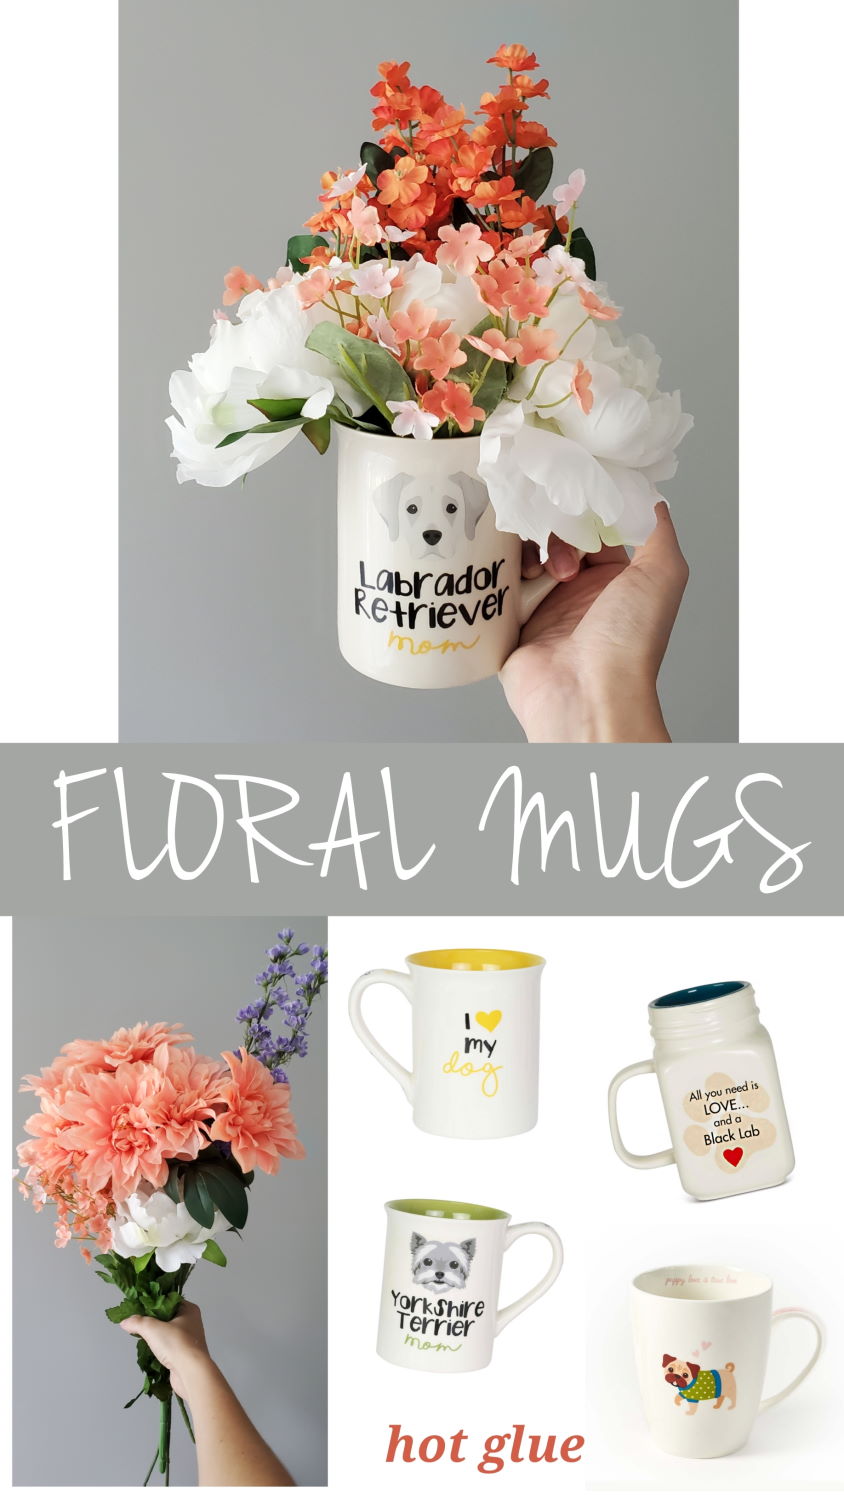 How to Make Floral Mugs